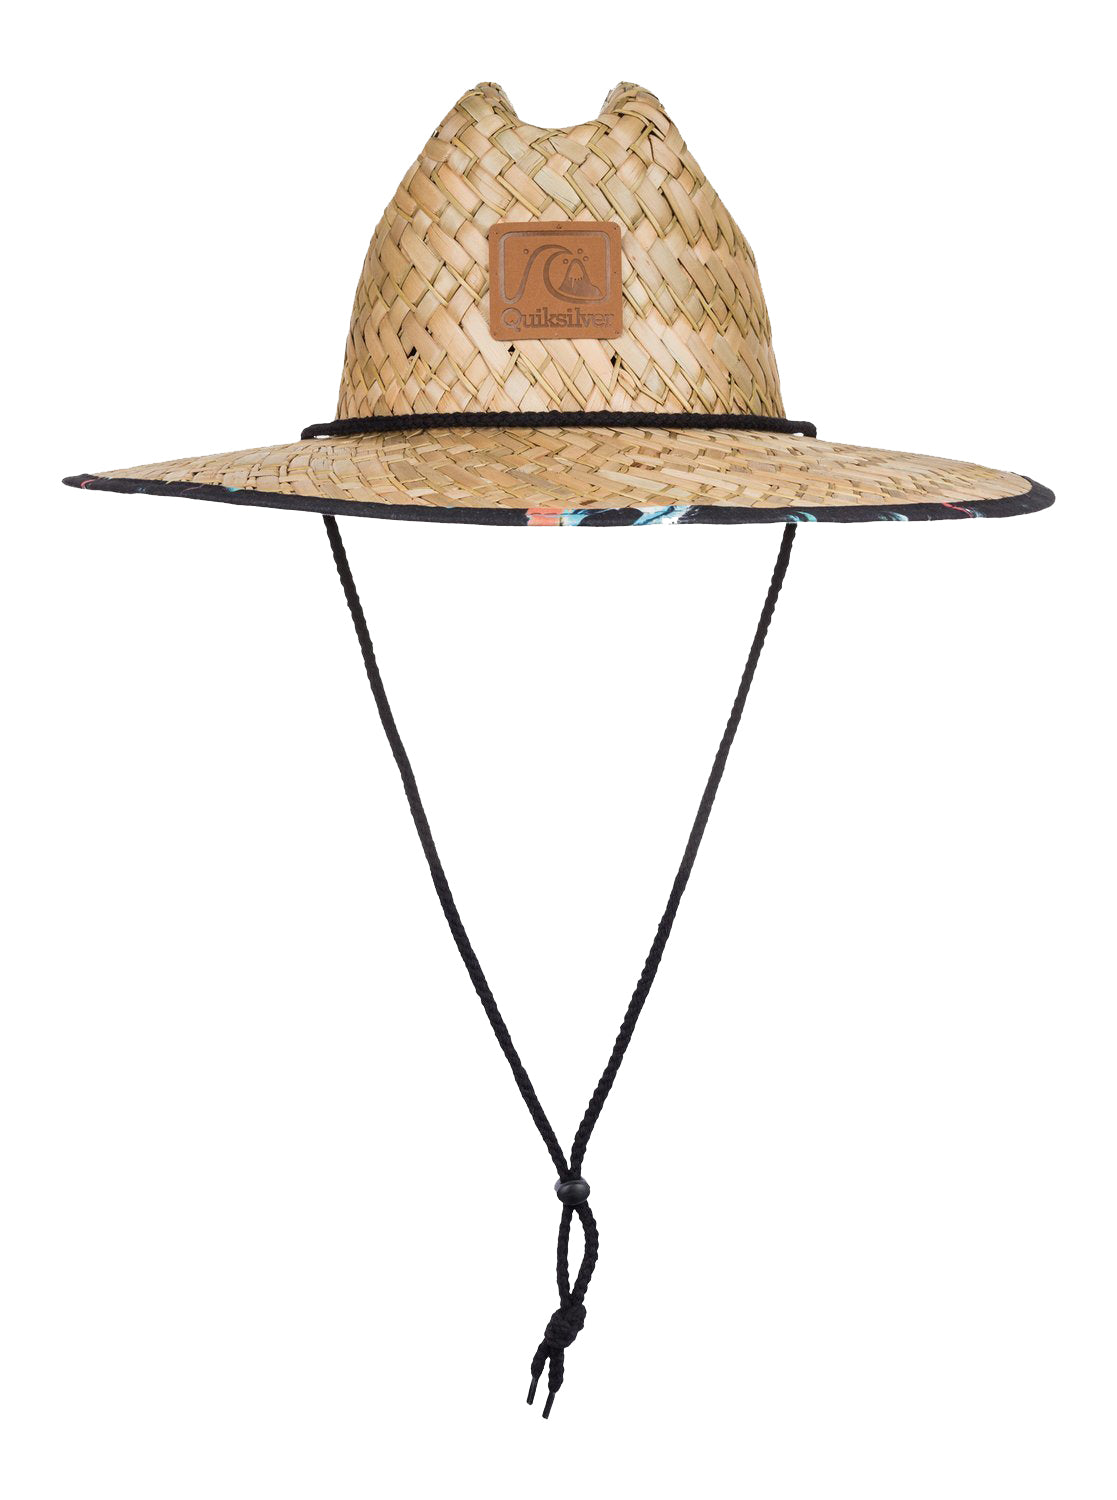 Quiksilver Outsider Straw Lifeguard Hat KTA0 S/M